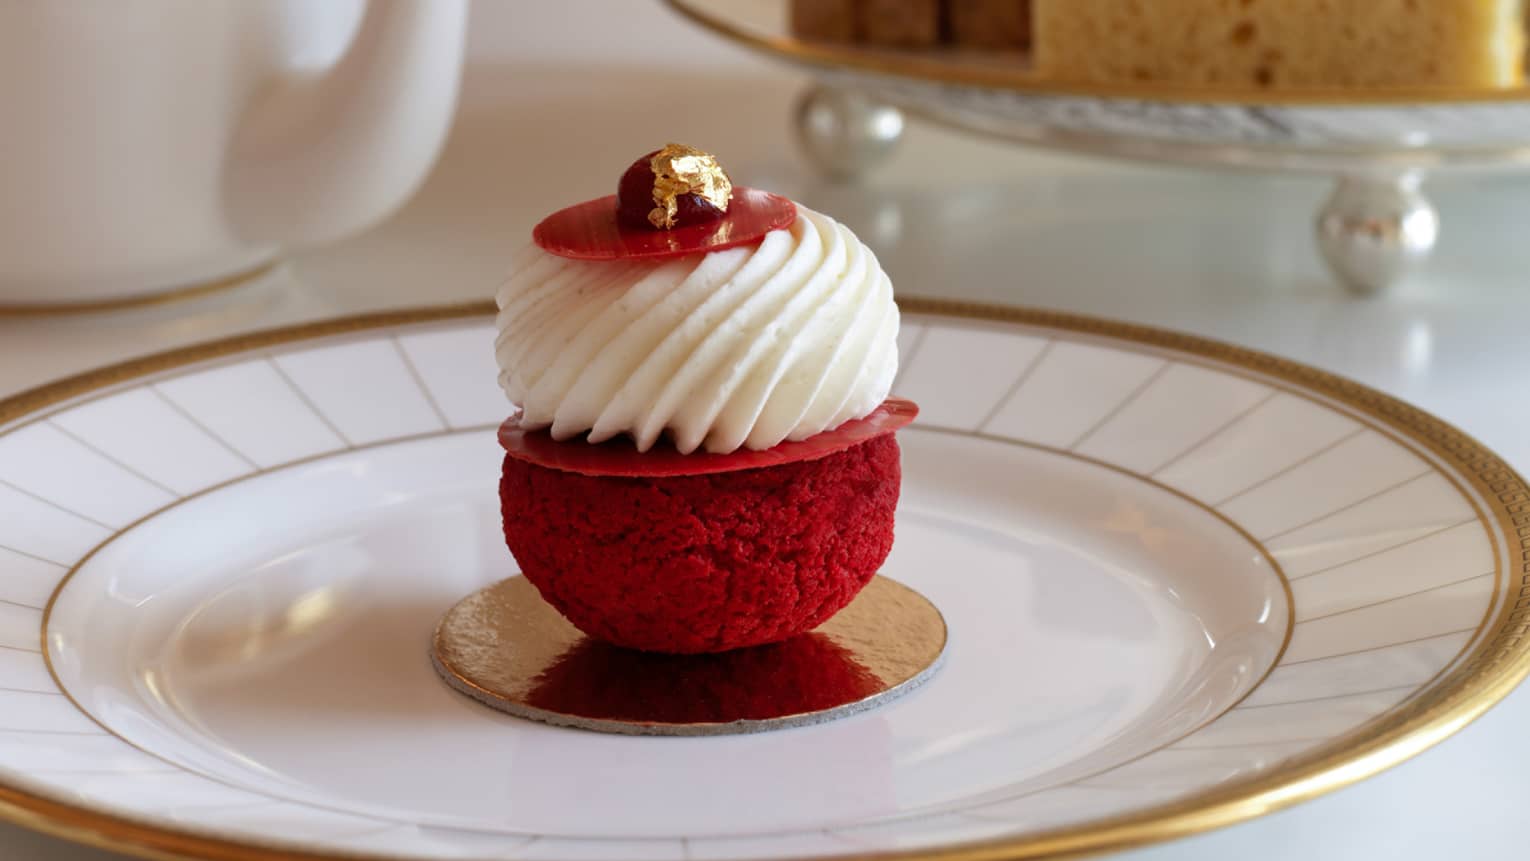 Afternoon tea at Rotunda Lounge serves red cream-topped pastry on white and gold plate